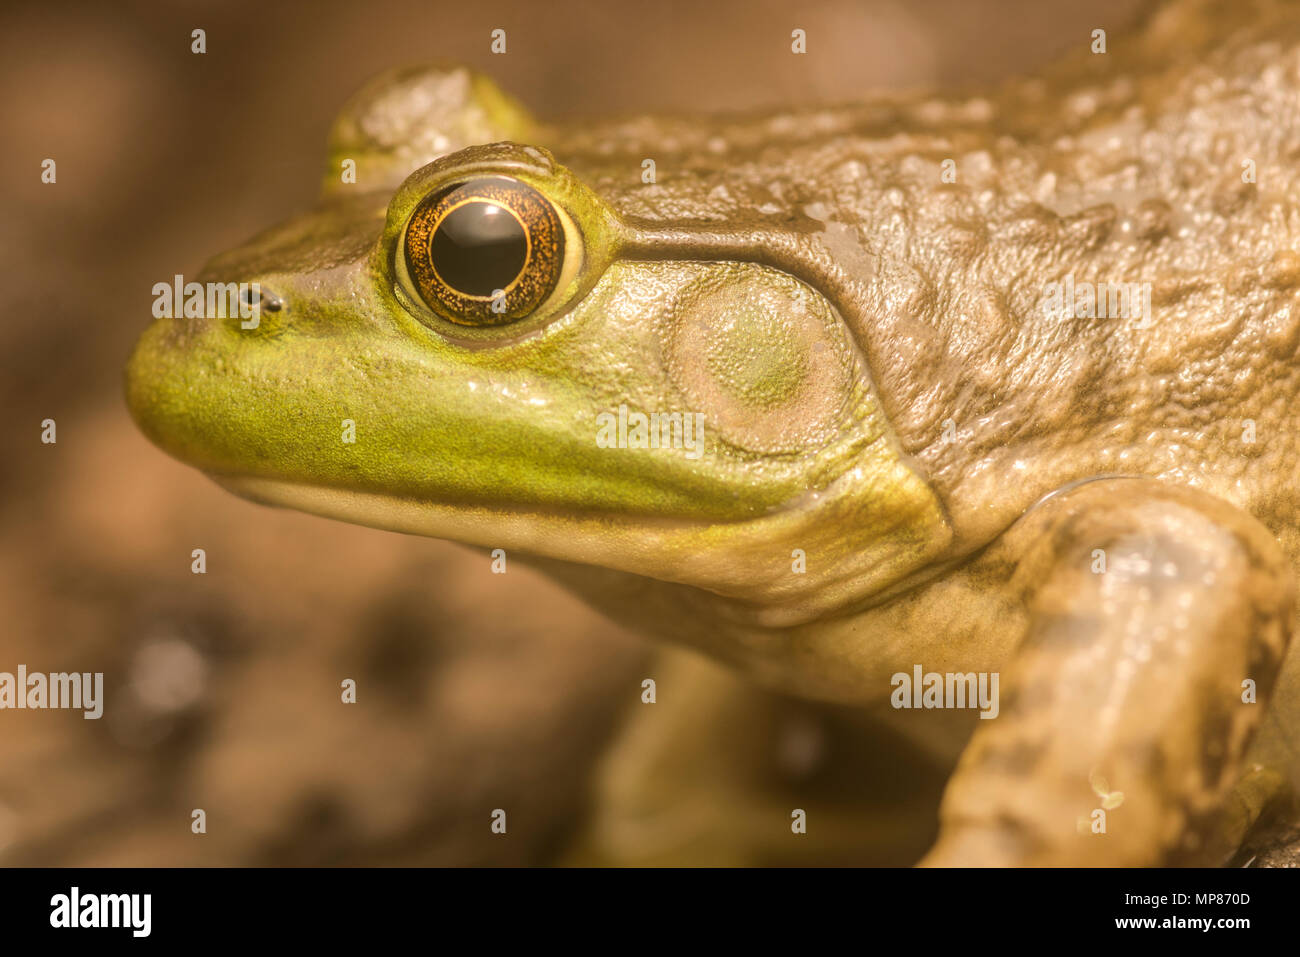 An american bullfrog (Lithobates catesbeianus) from North Carolina. Similar to green frogs, the best way to tell it apart is the dorsolateral fold. Stock Photo